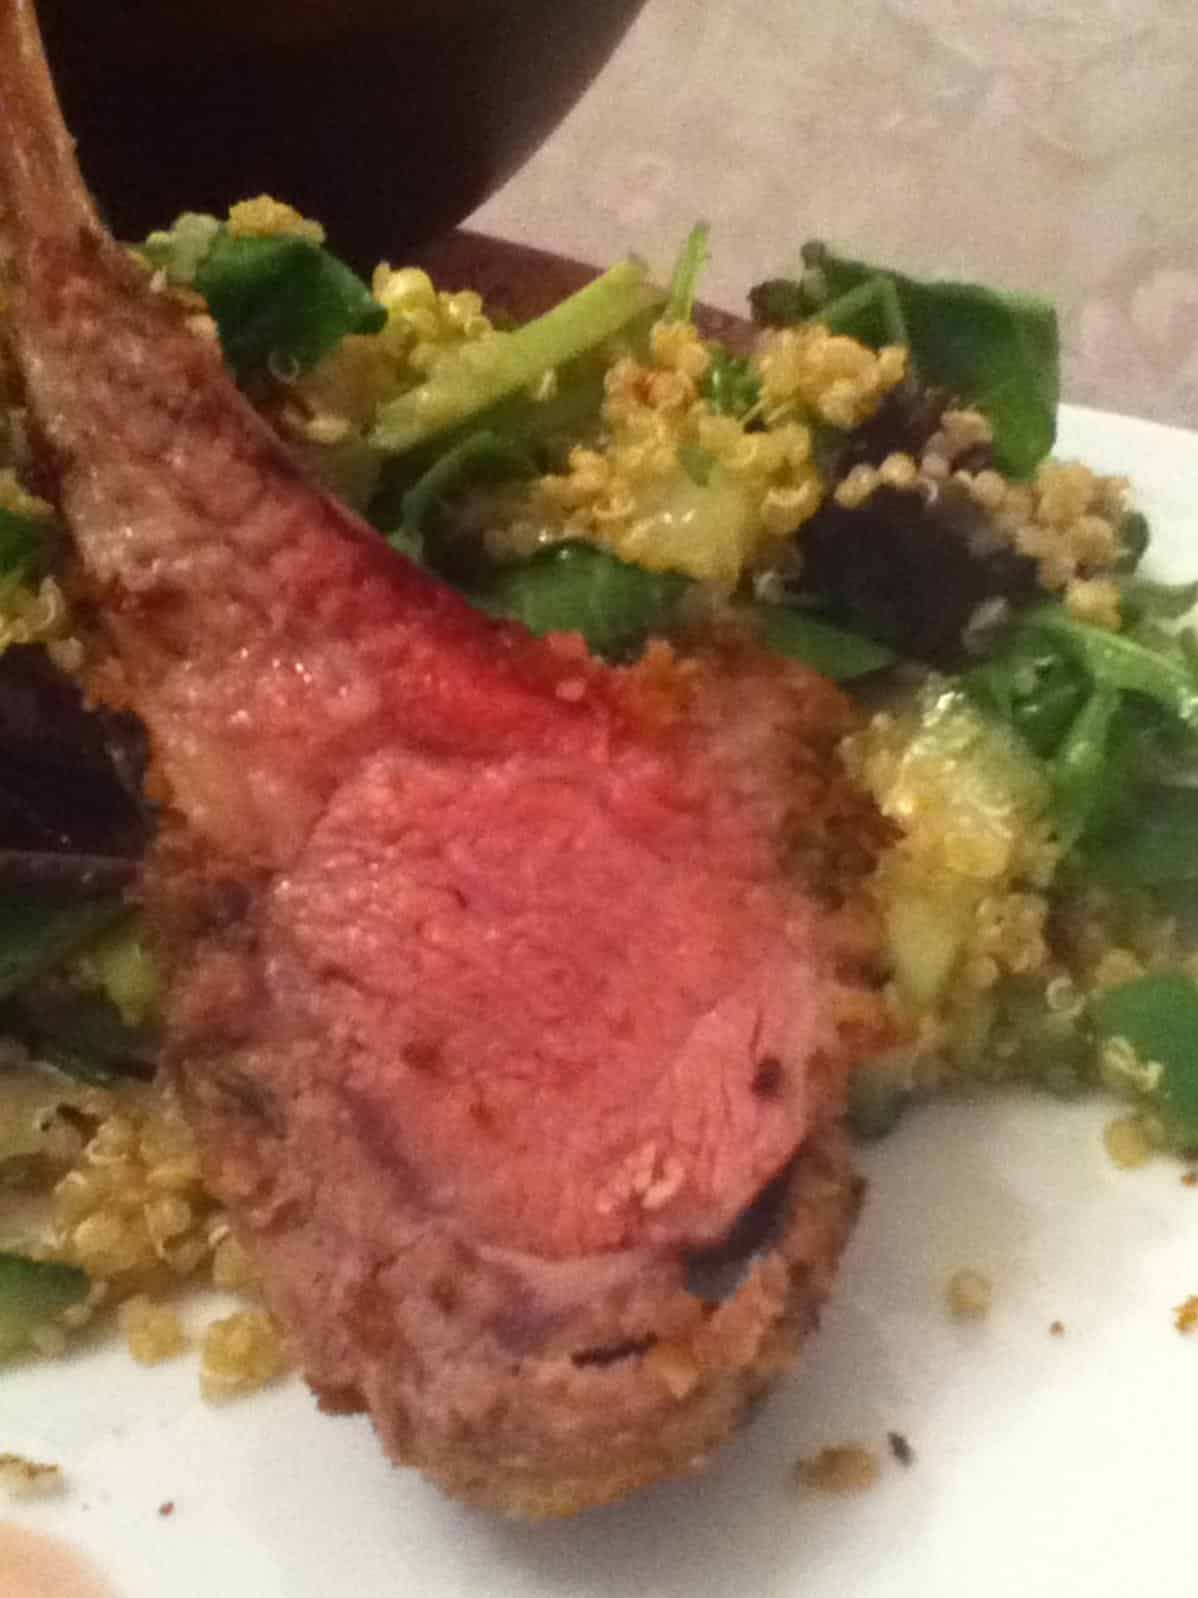  Juicy, succulent grilled rack of lamb perfect for a fancy dinner party.